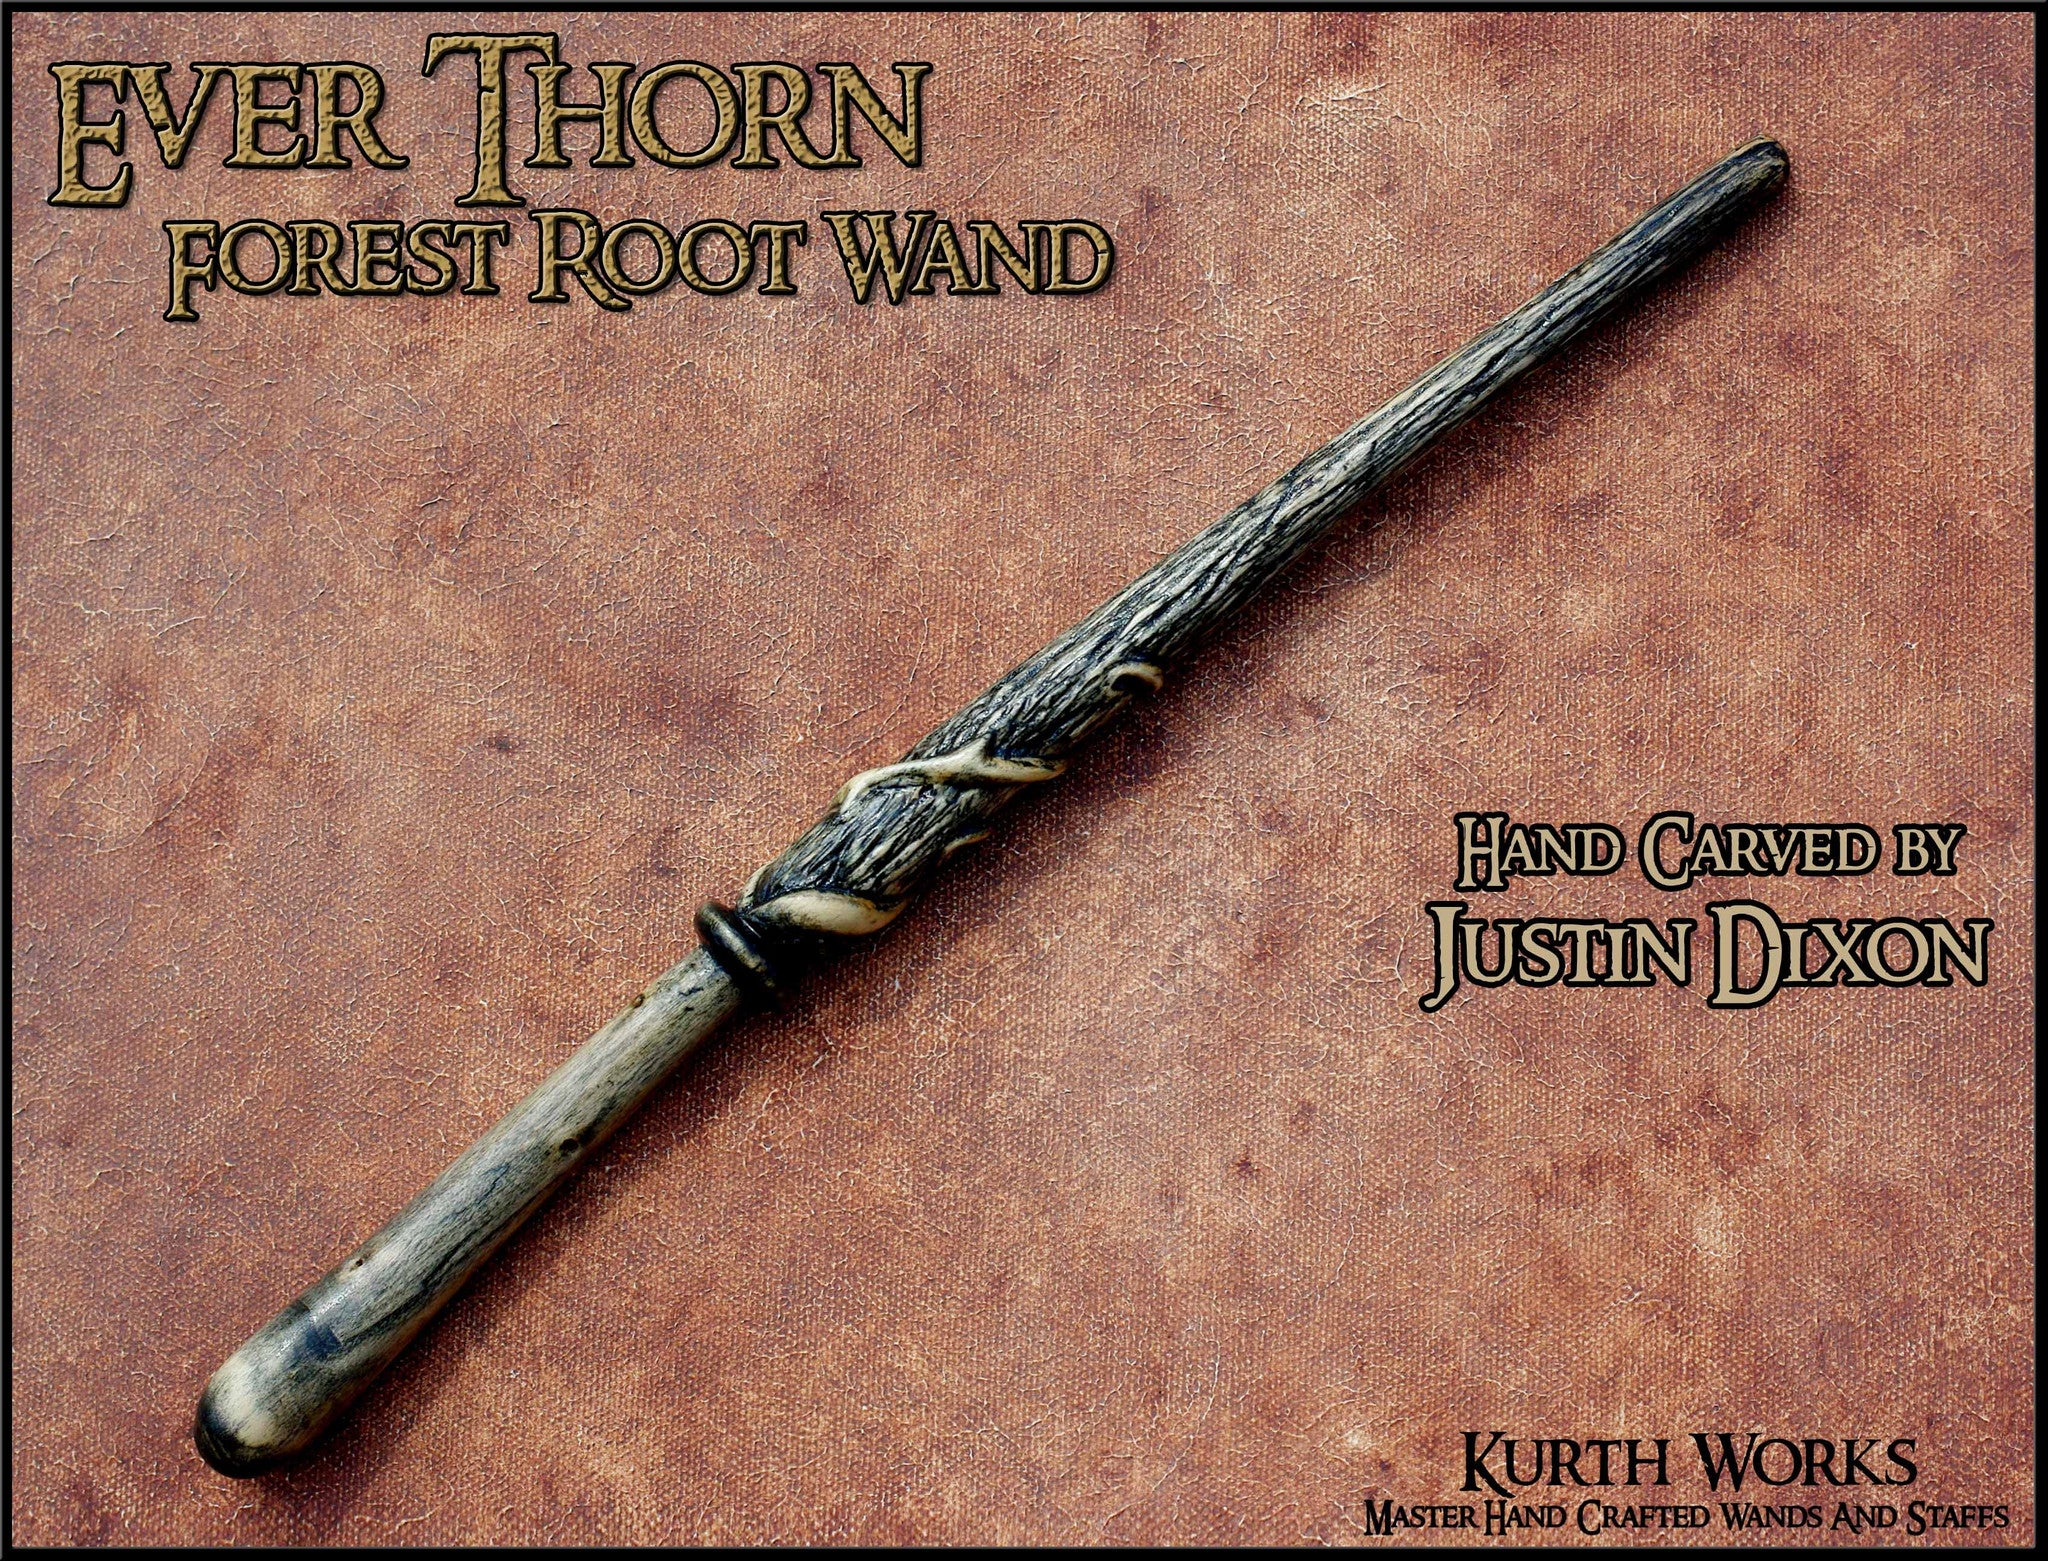 Ever Thorn Magic Wizard Wooden Wand